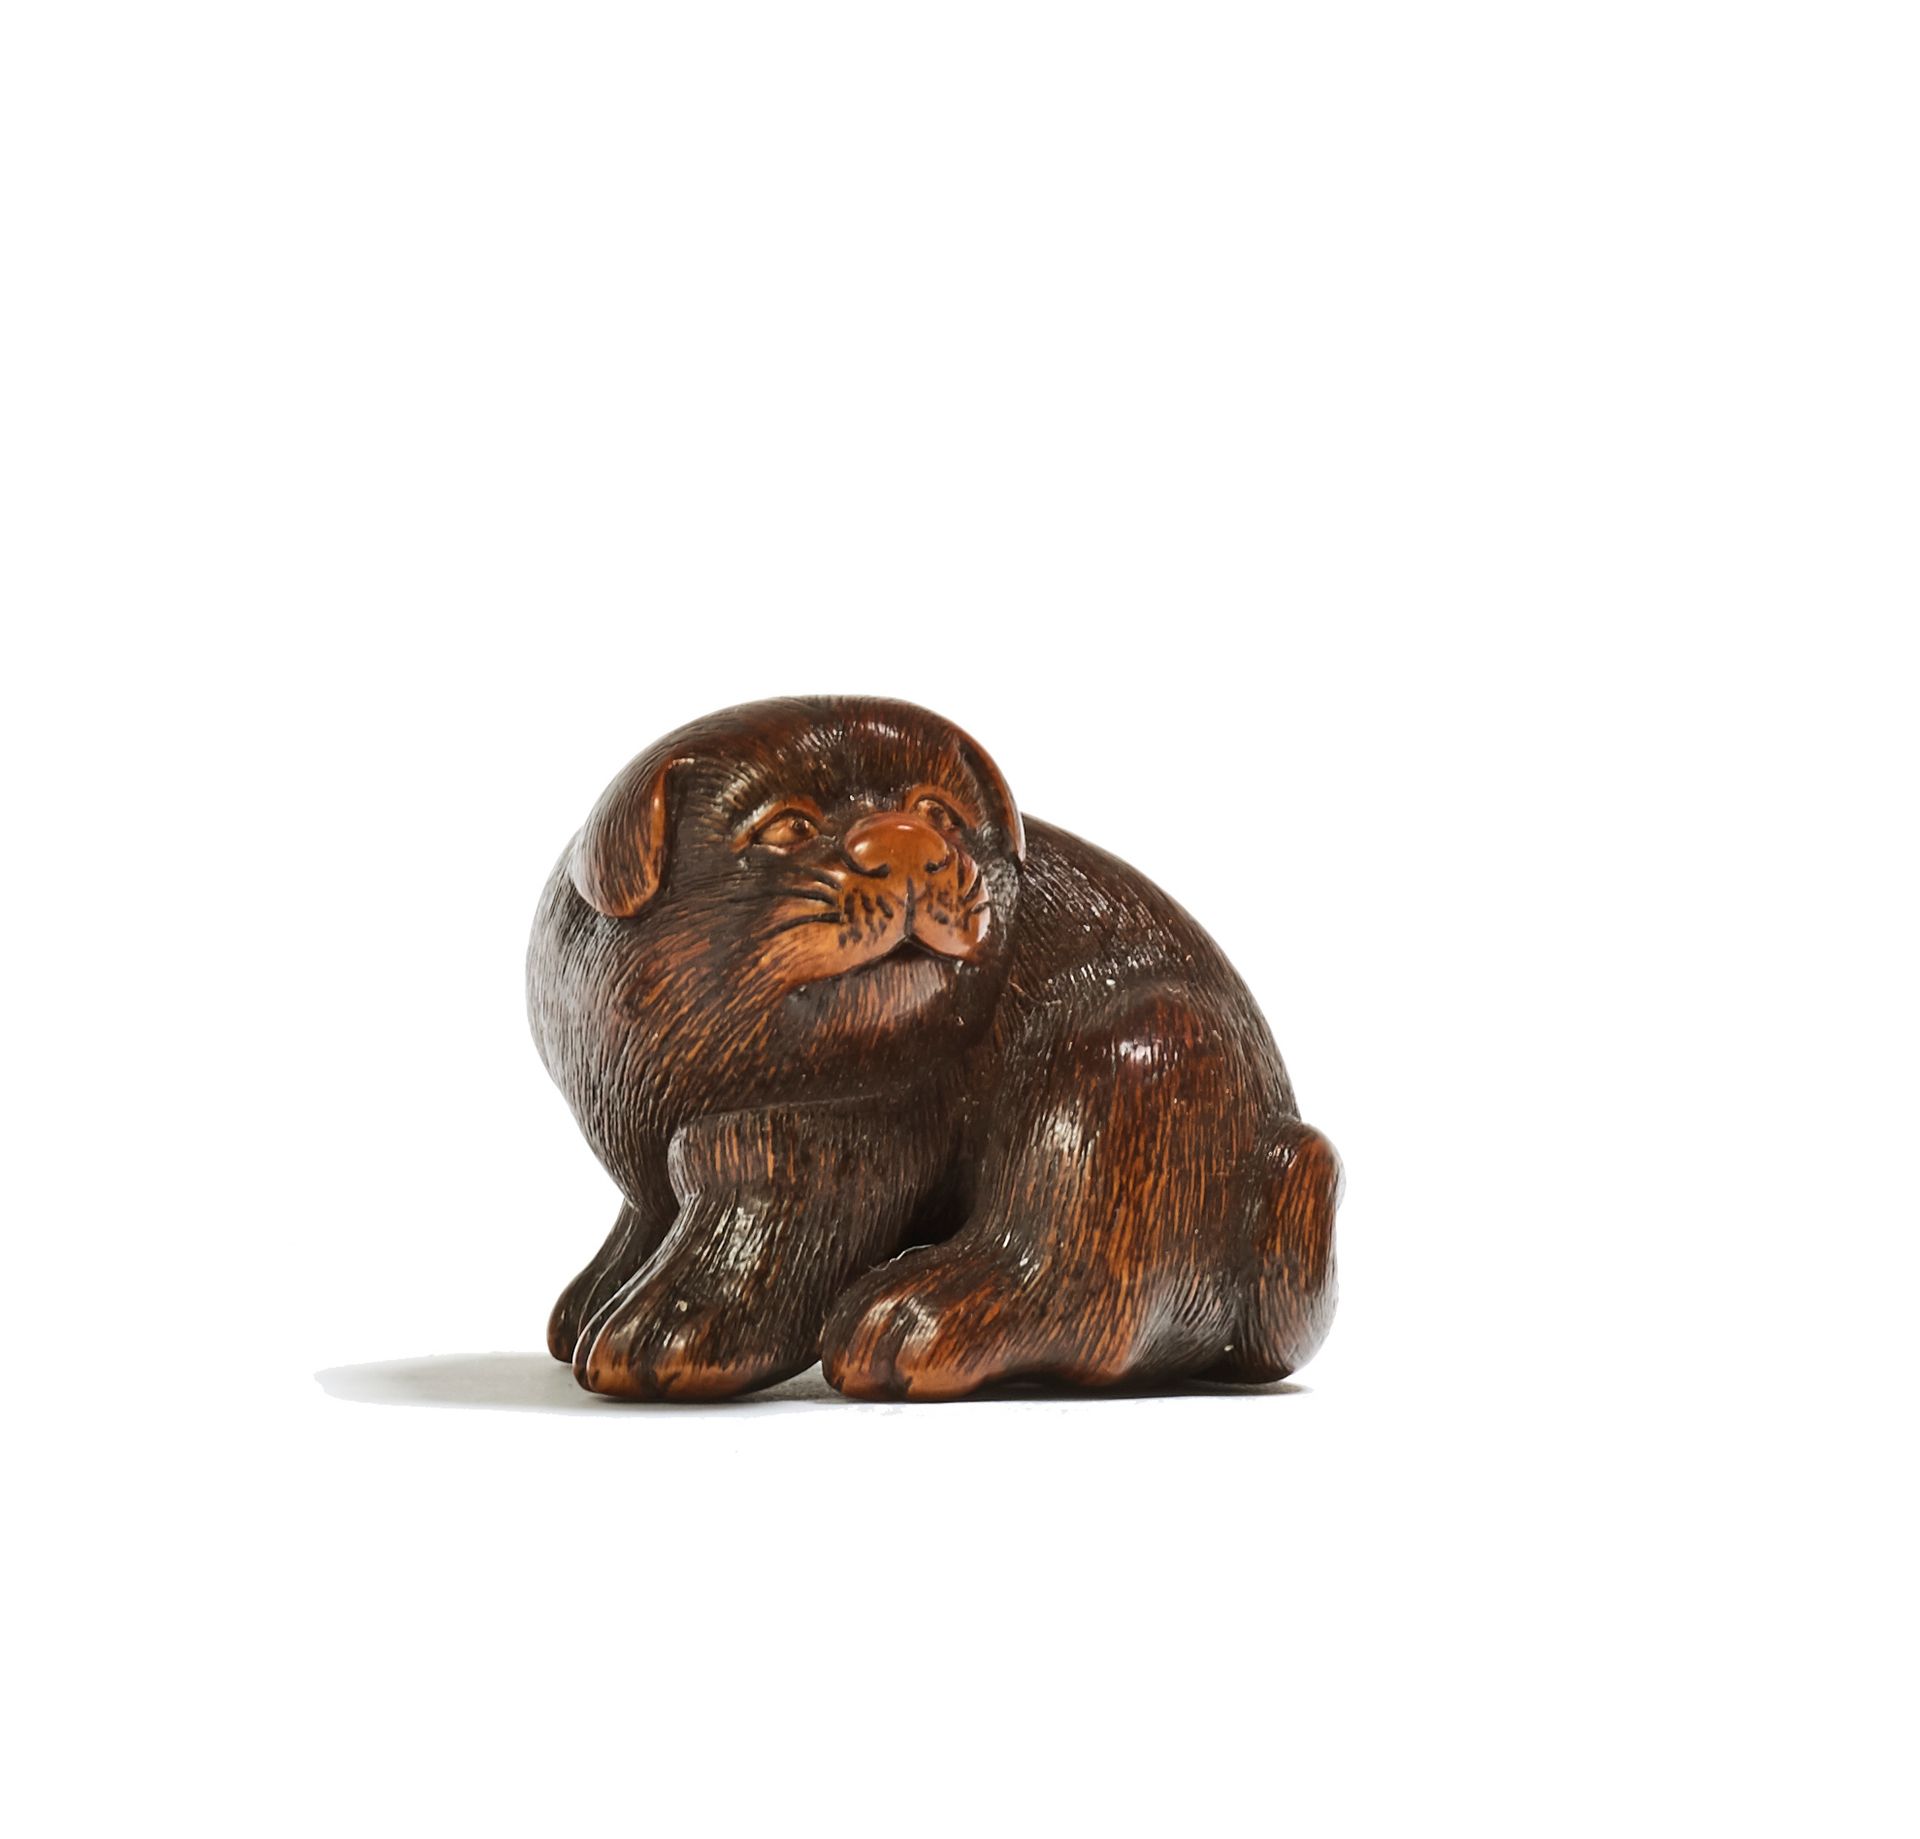 JAPON - XIXE SIÈCLE Wooden netsuke, puppy with floppy ears, sitting and looking &hellip;